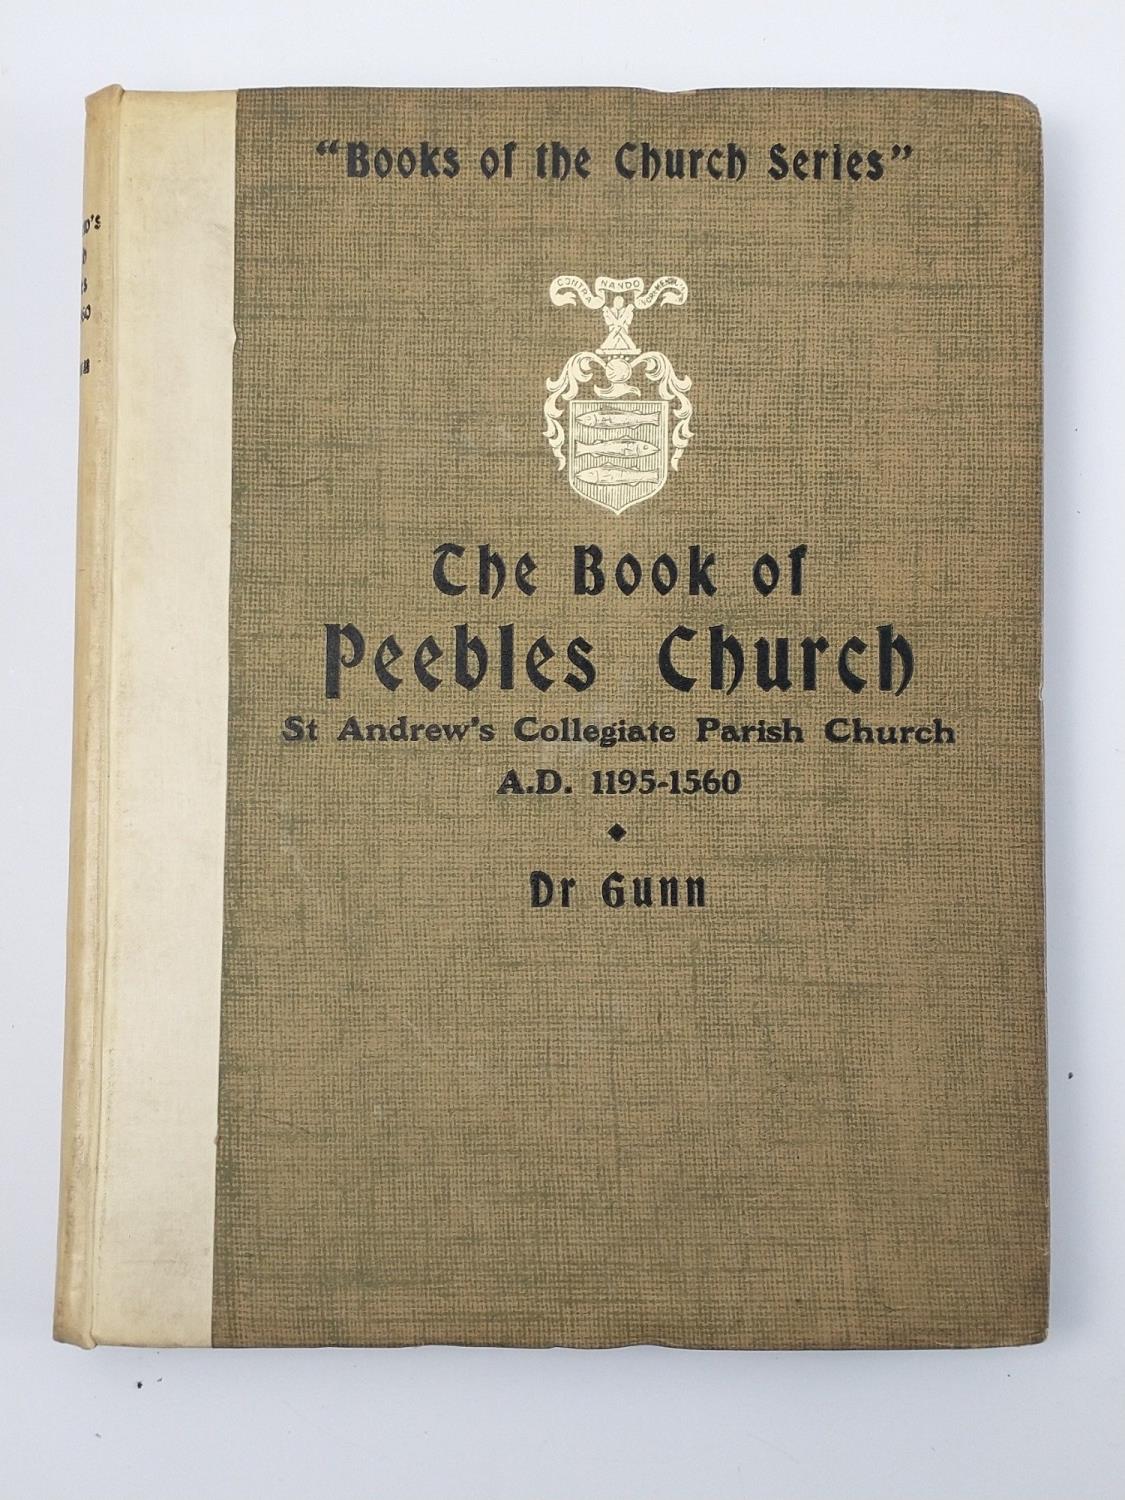 LOCAL INTEREST - Dr Clement Gunn Books of the Church Series 1908 Book of Peebles Church ST ANDREWS